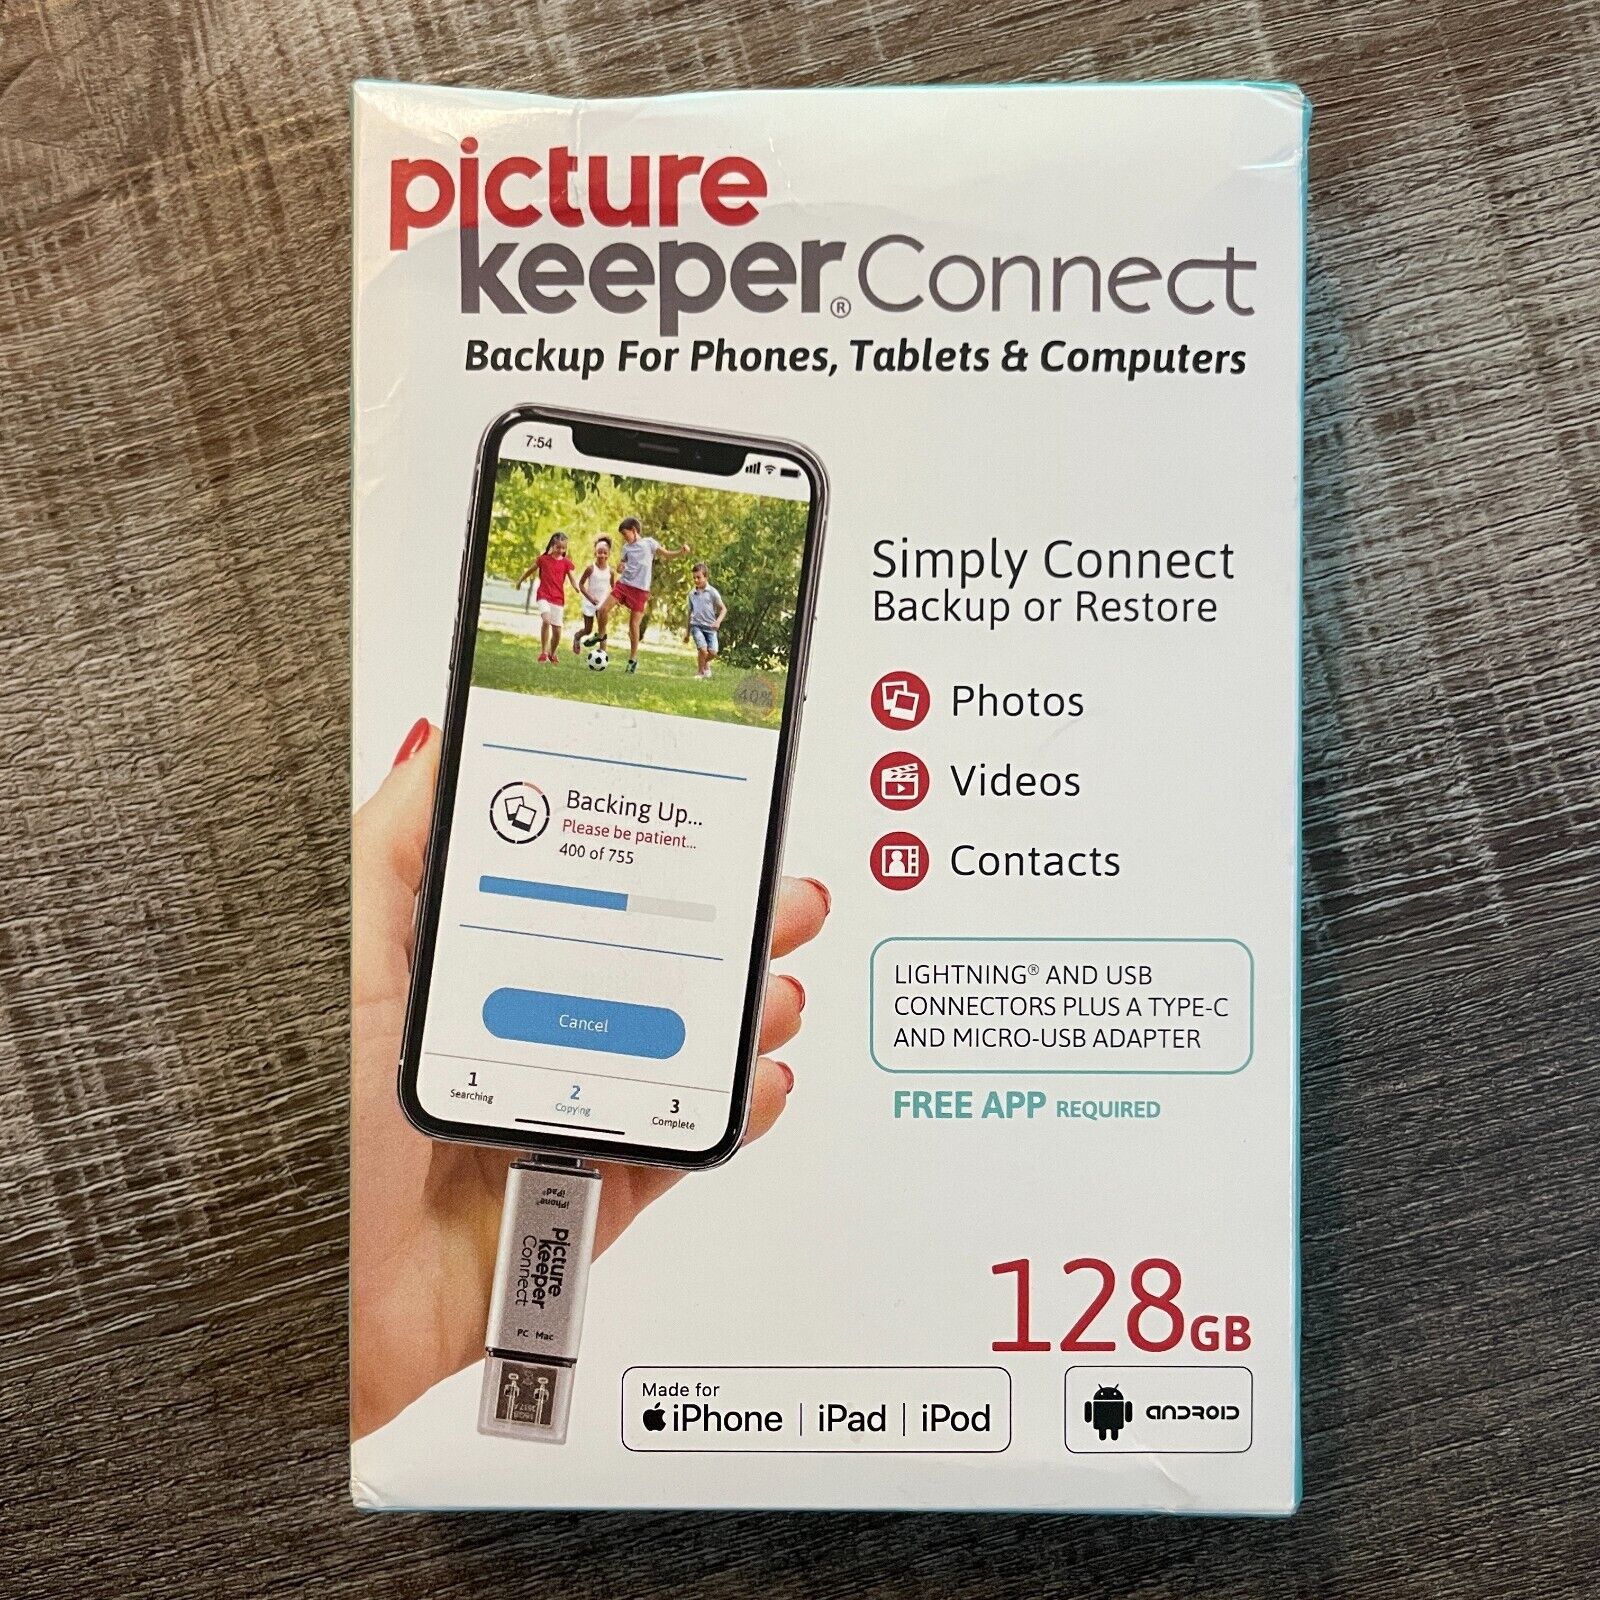 (New) Picture Keeper Connect 128GB Portable USB Backup Storage iPhone & Android